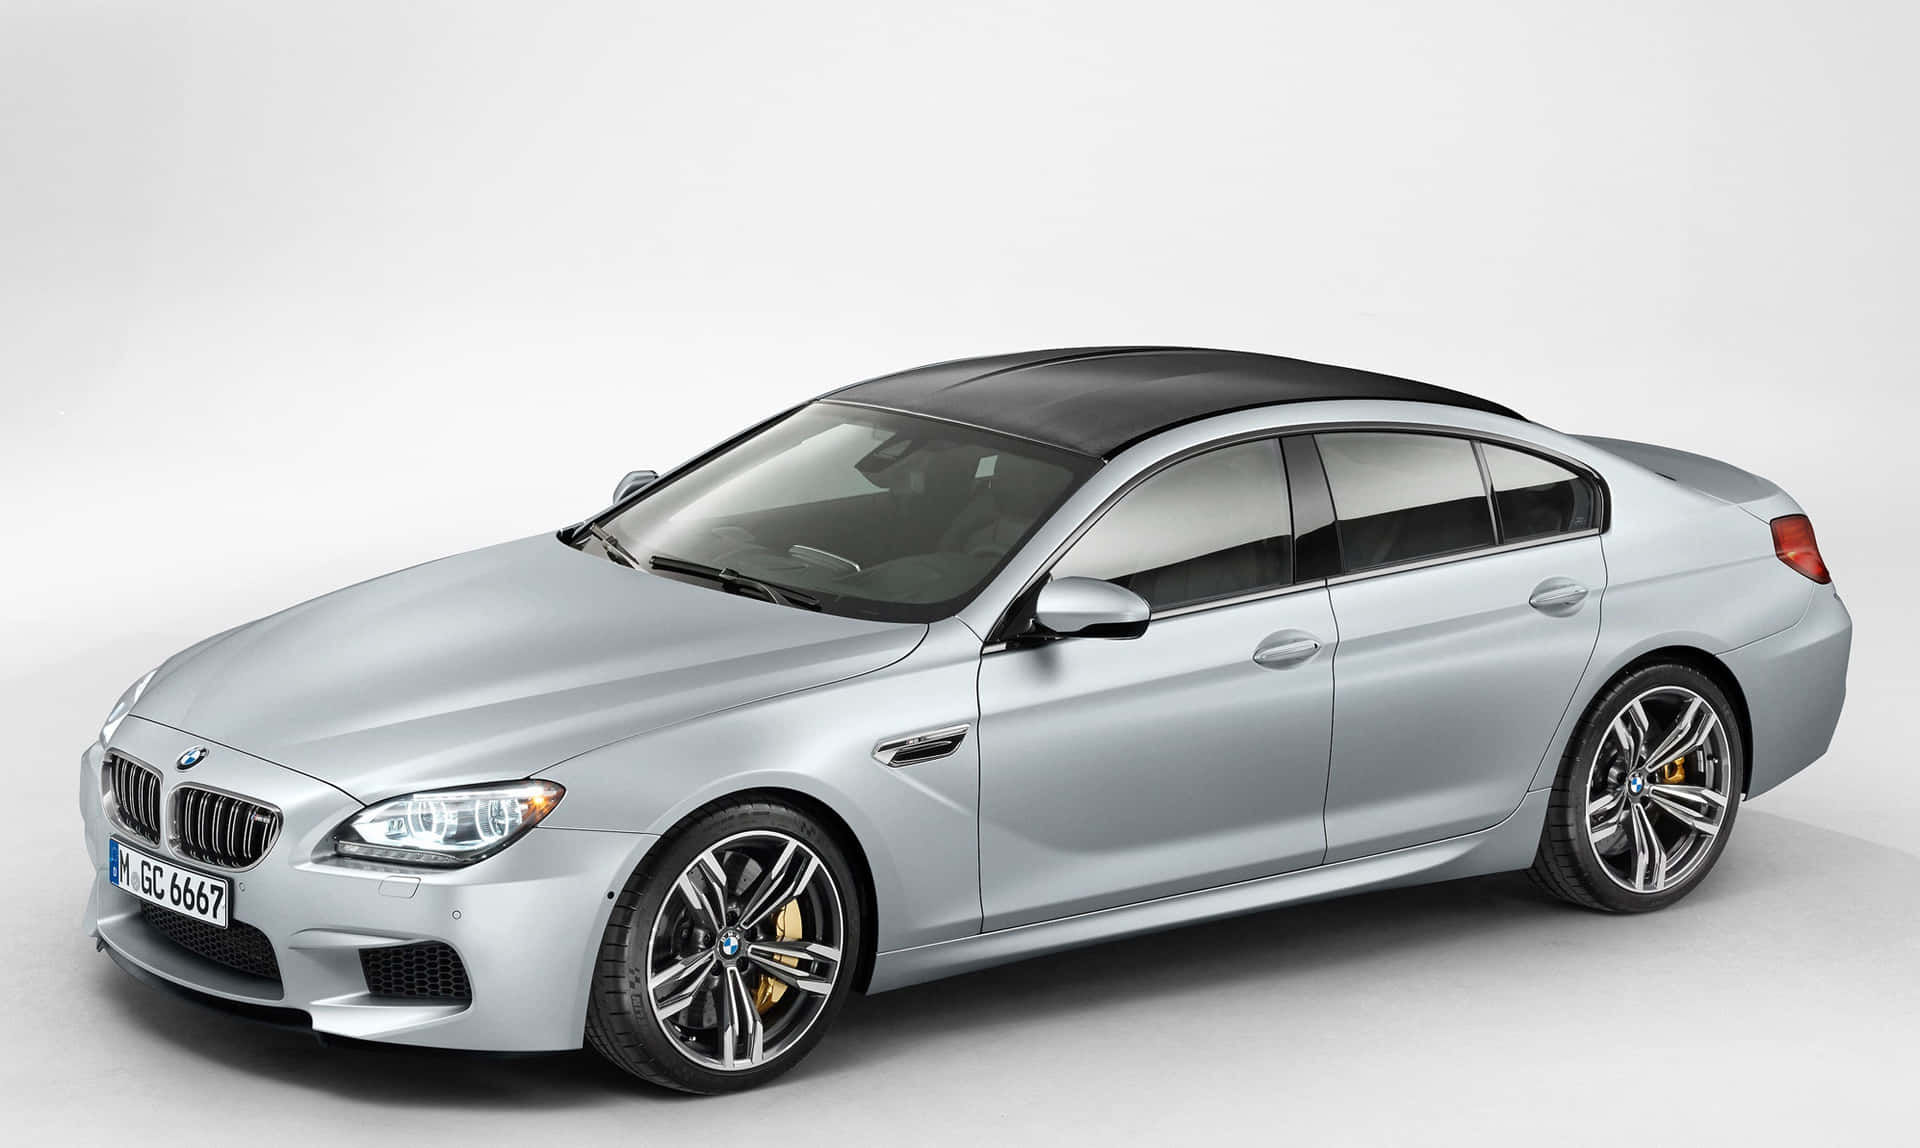 Unleash the Power within - BMW M6 Gran Coupe Wallpaper